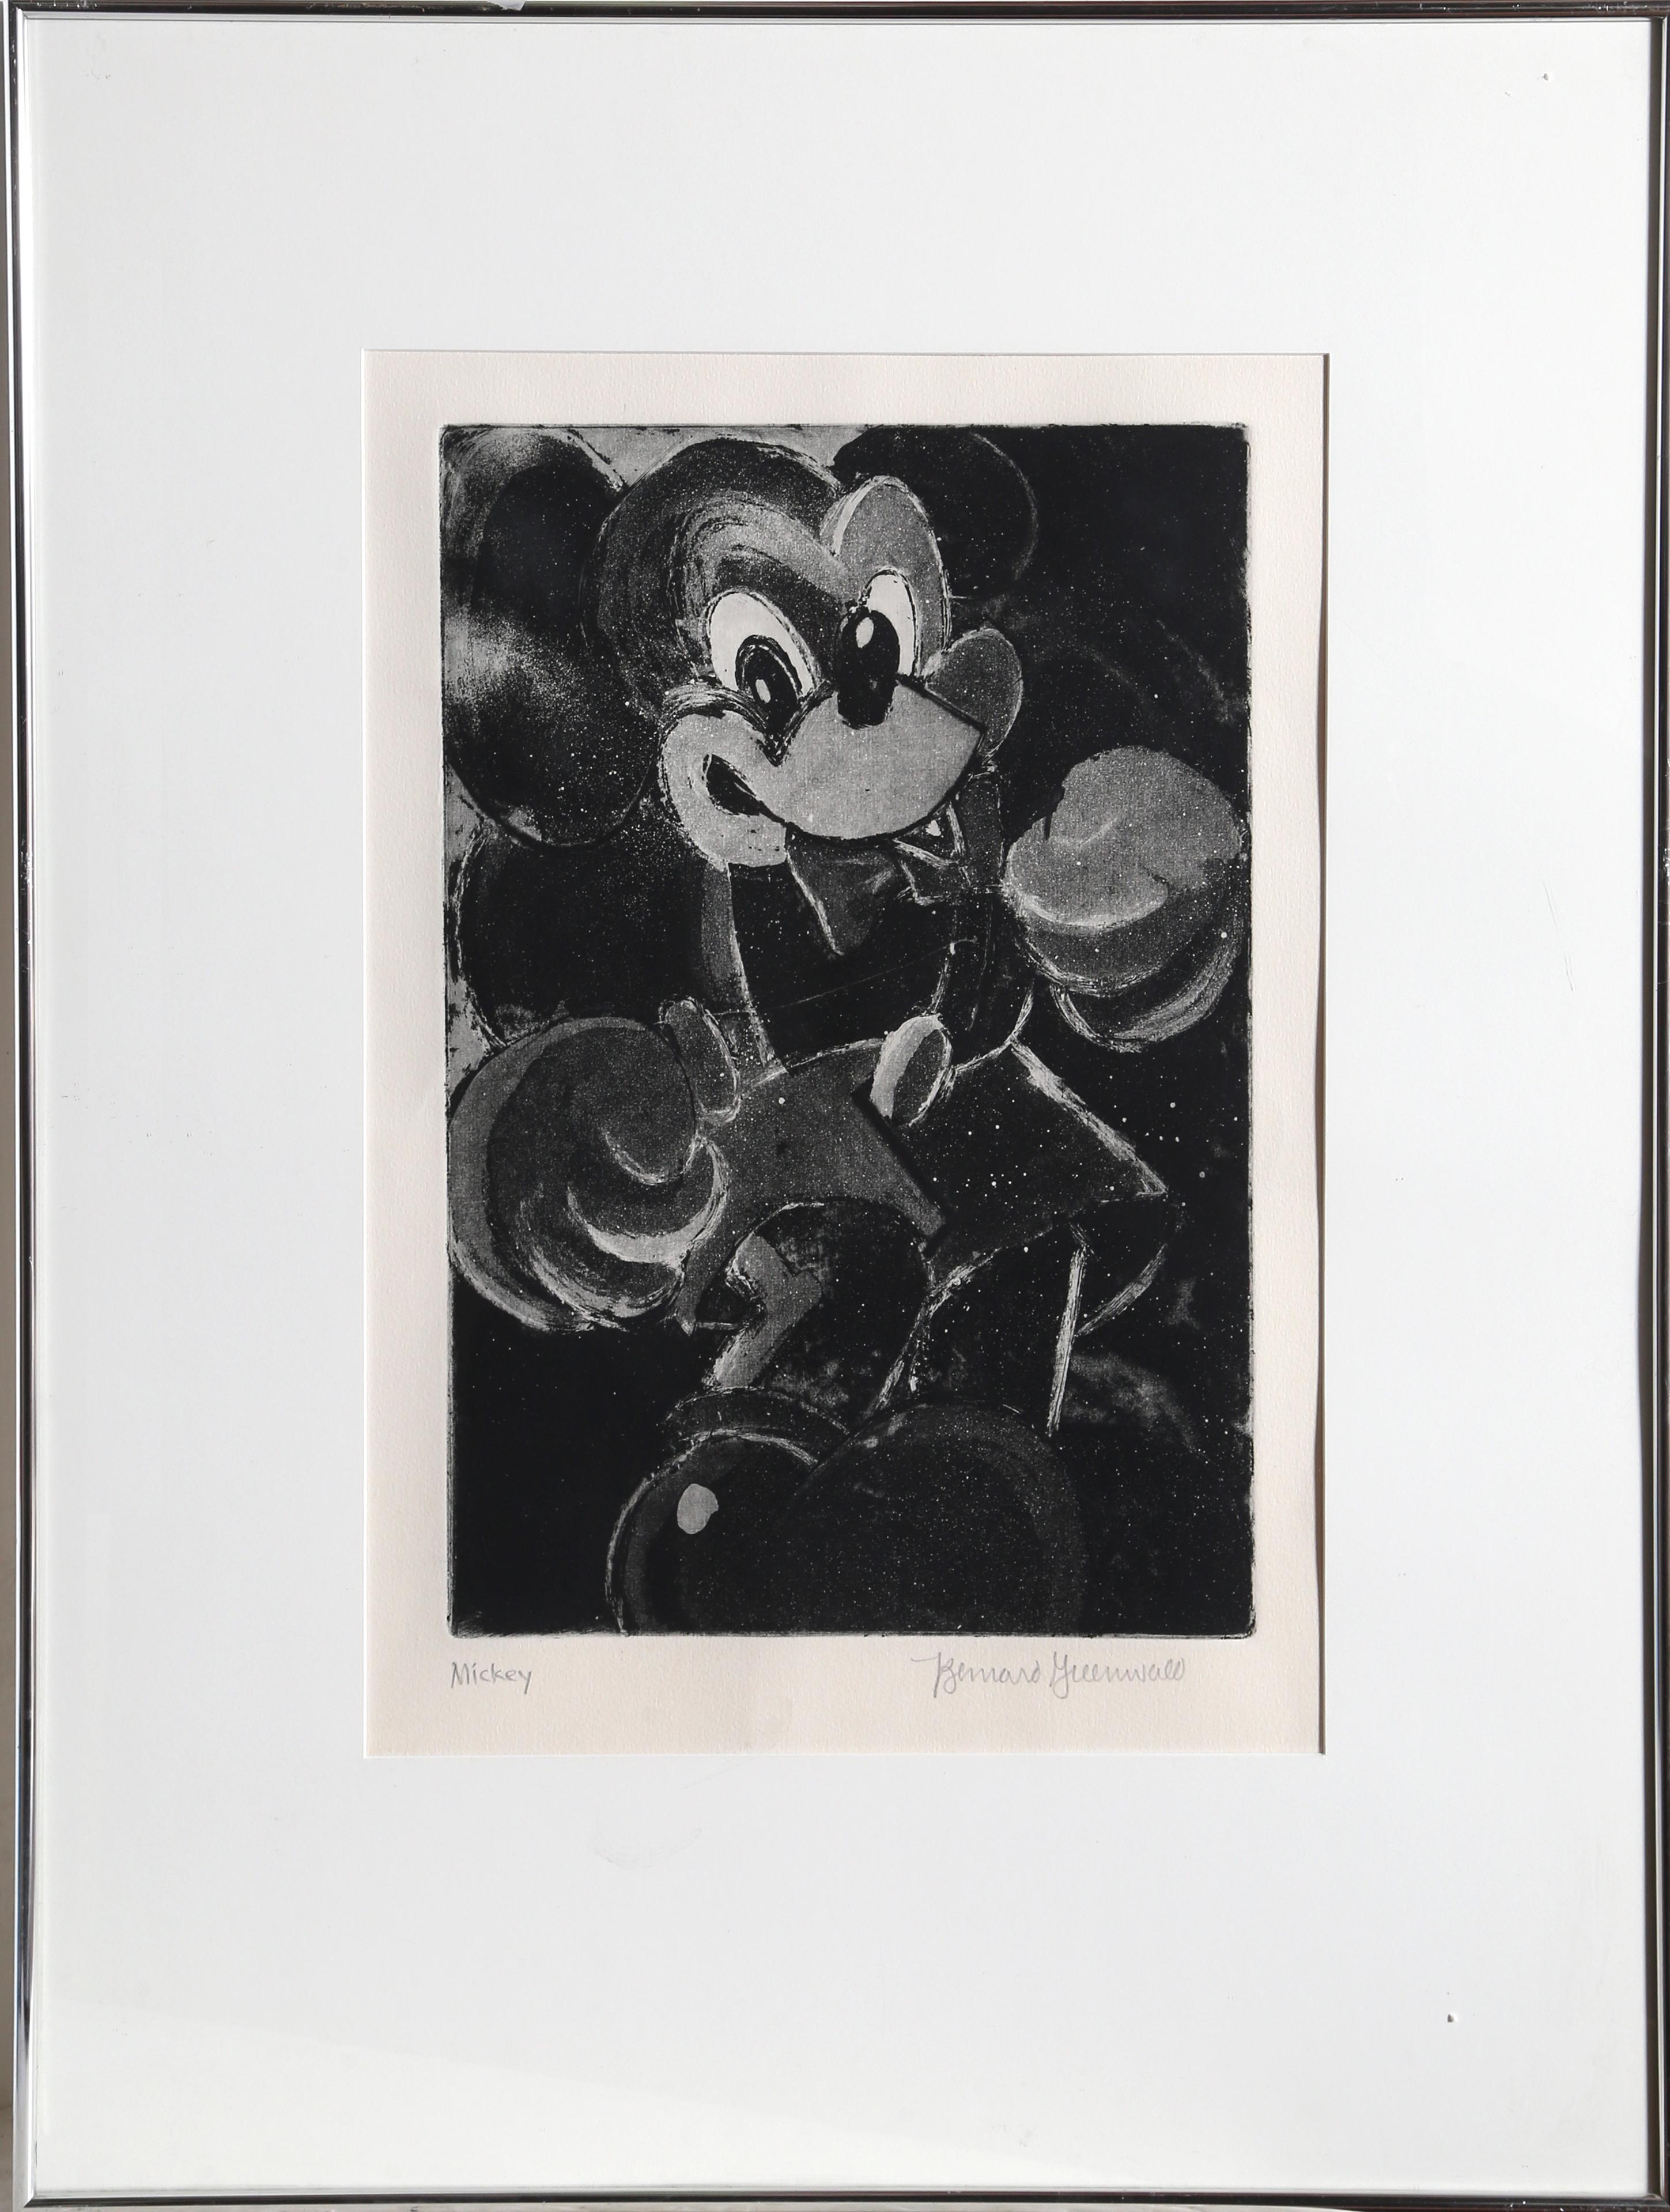 Artist: Bernard Greenwald, American (1941 -  )
Title: Mickey Mouse #2
Year: circa 1990
Medium: Etching, Signed and titled in pencil
Image Size: 17.5 x 12 inches
Frame: 32 x 24 inches